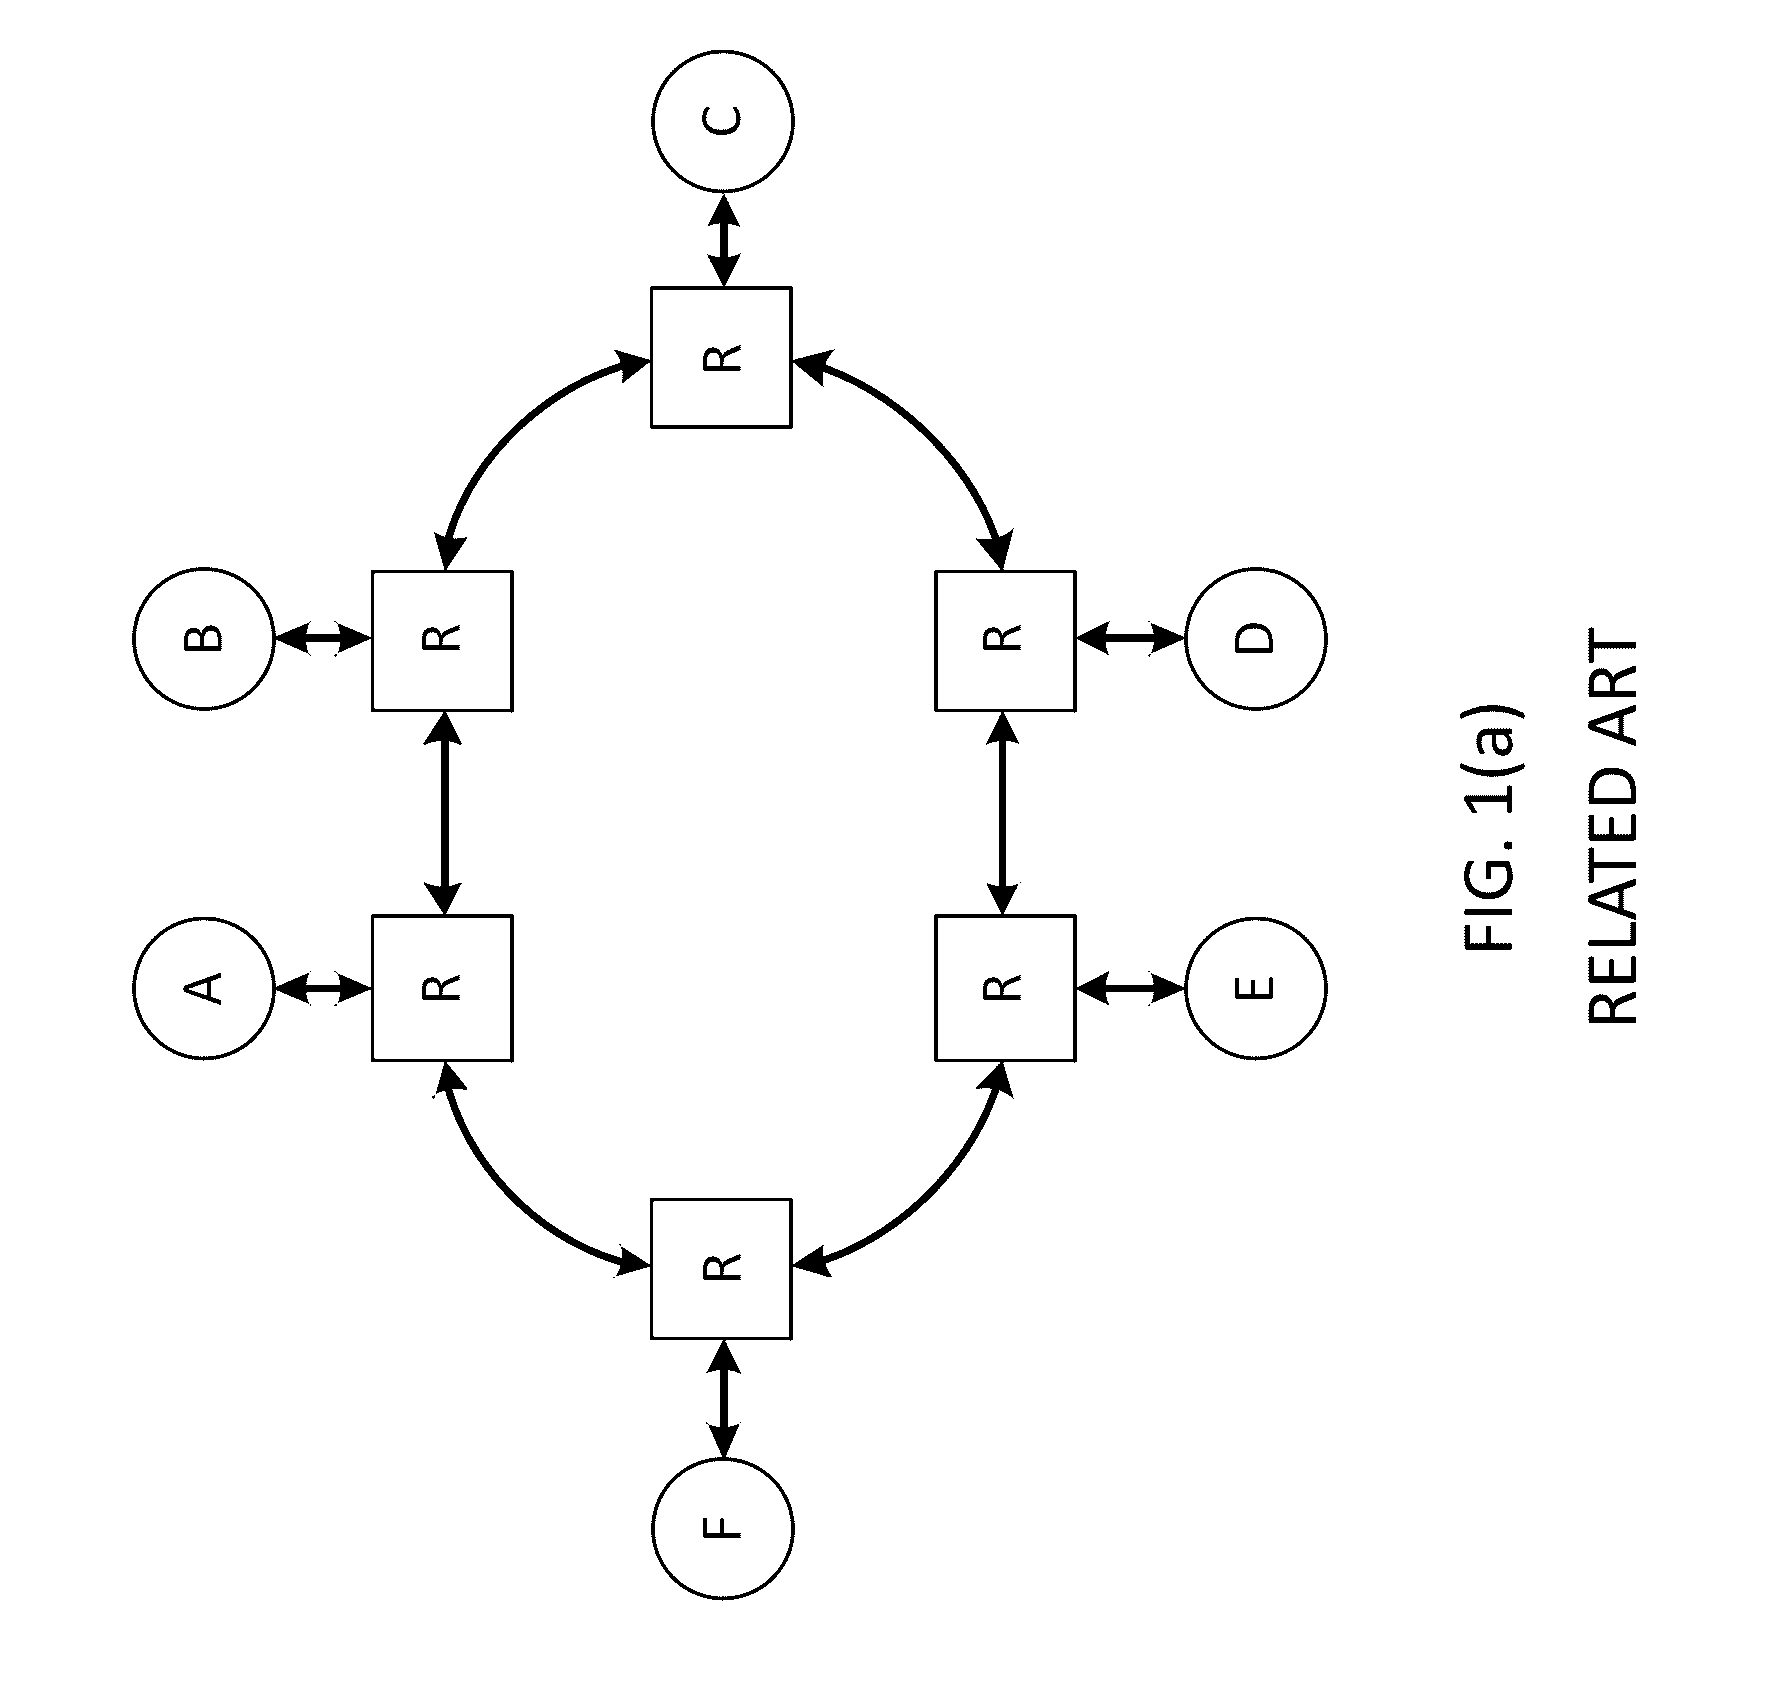 Specification for automatic power management of network-on-chip and system-on-chip